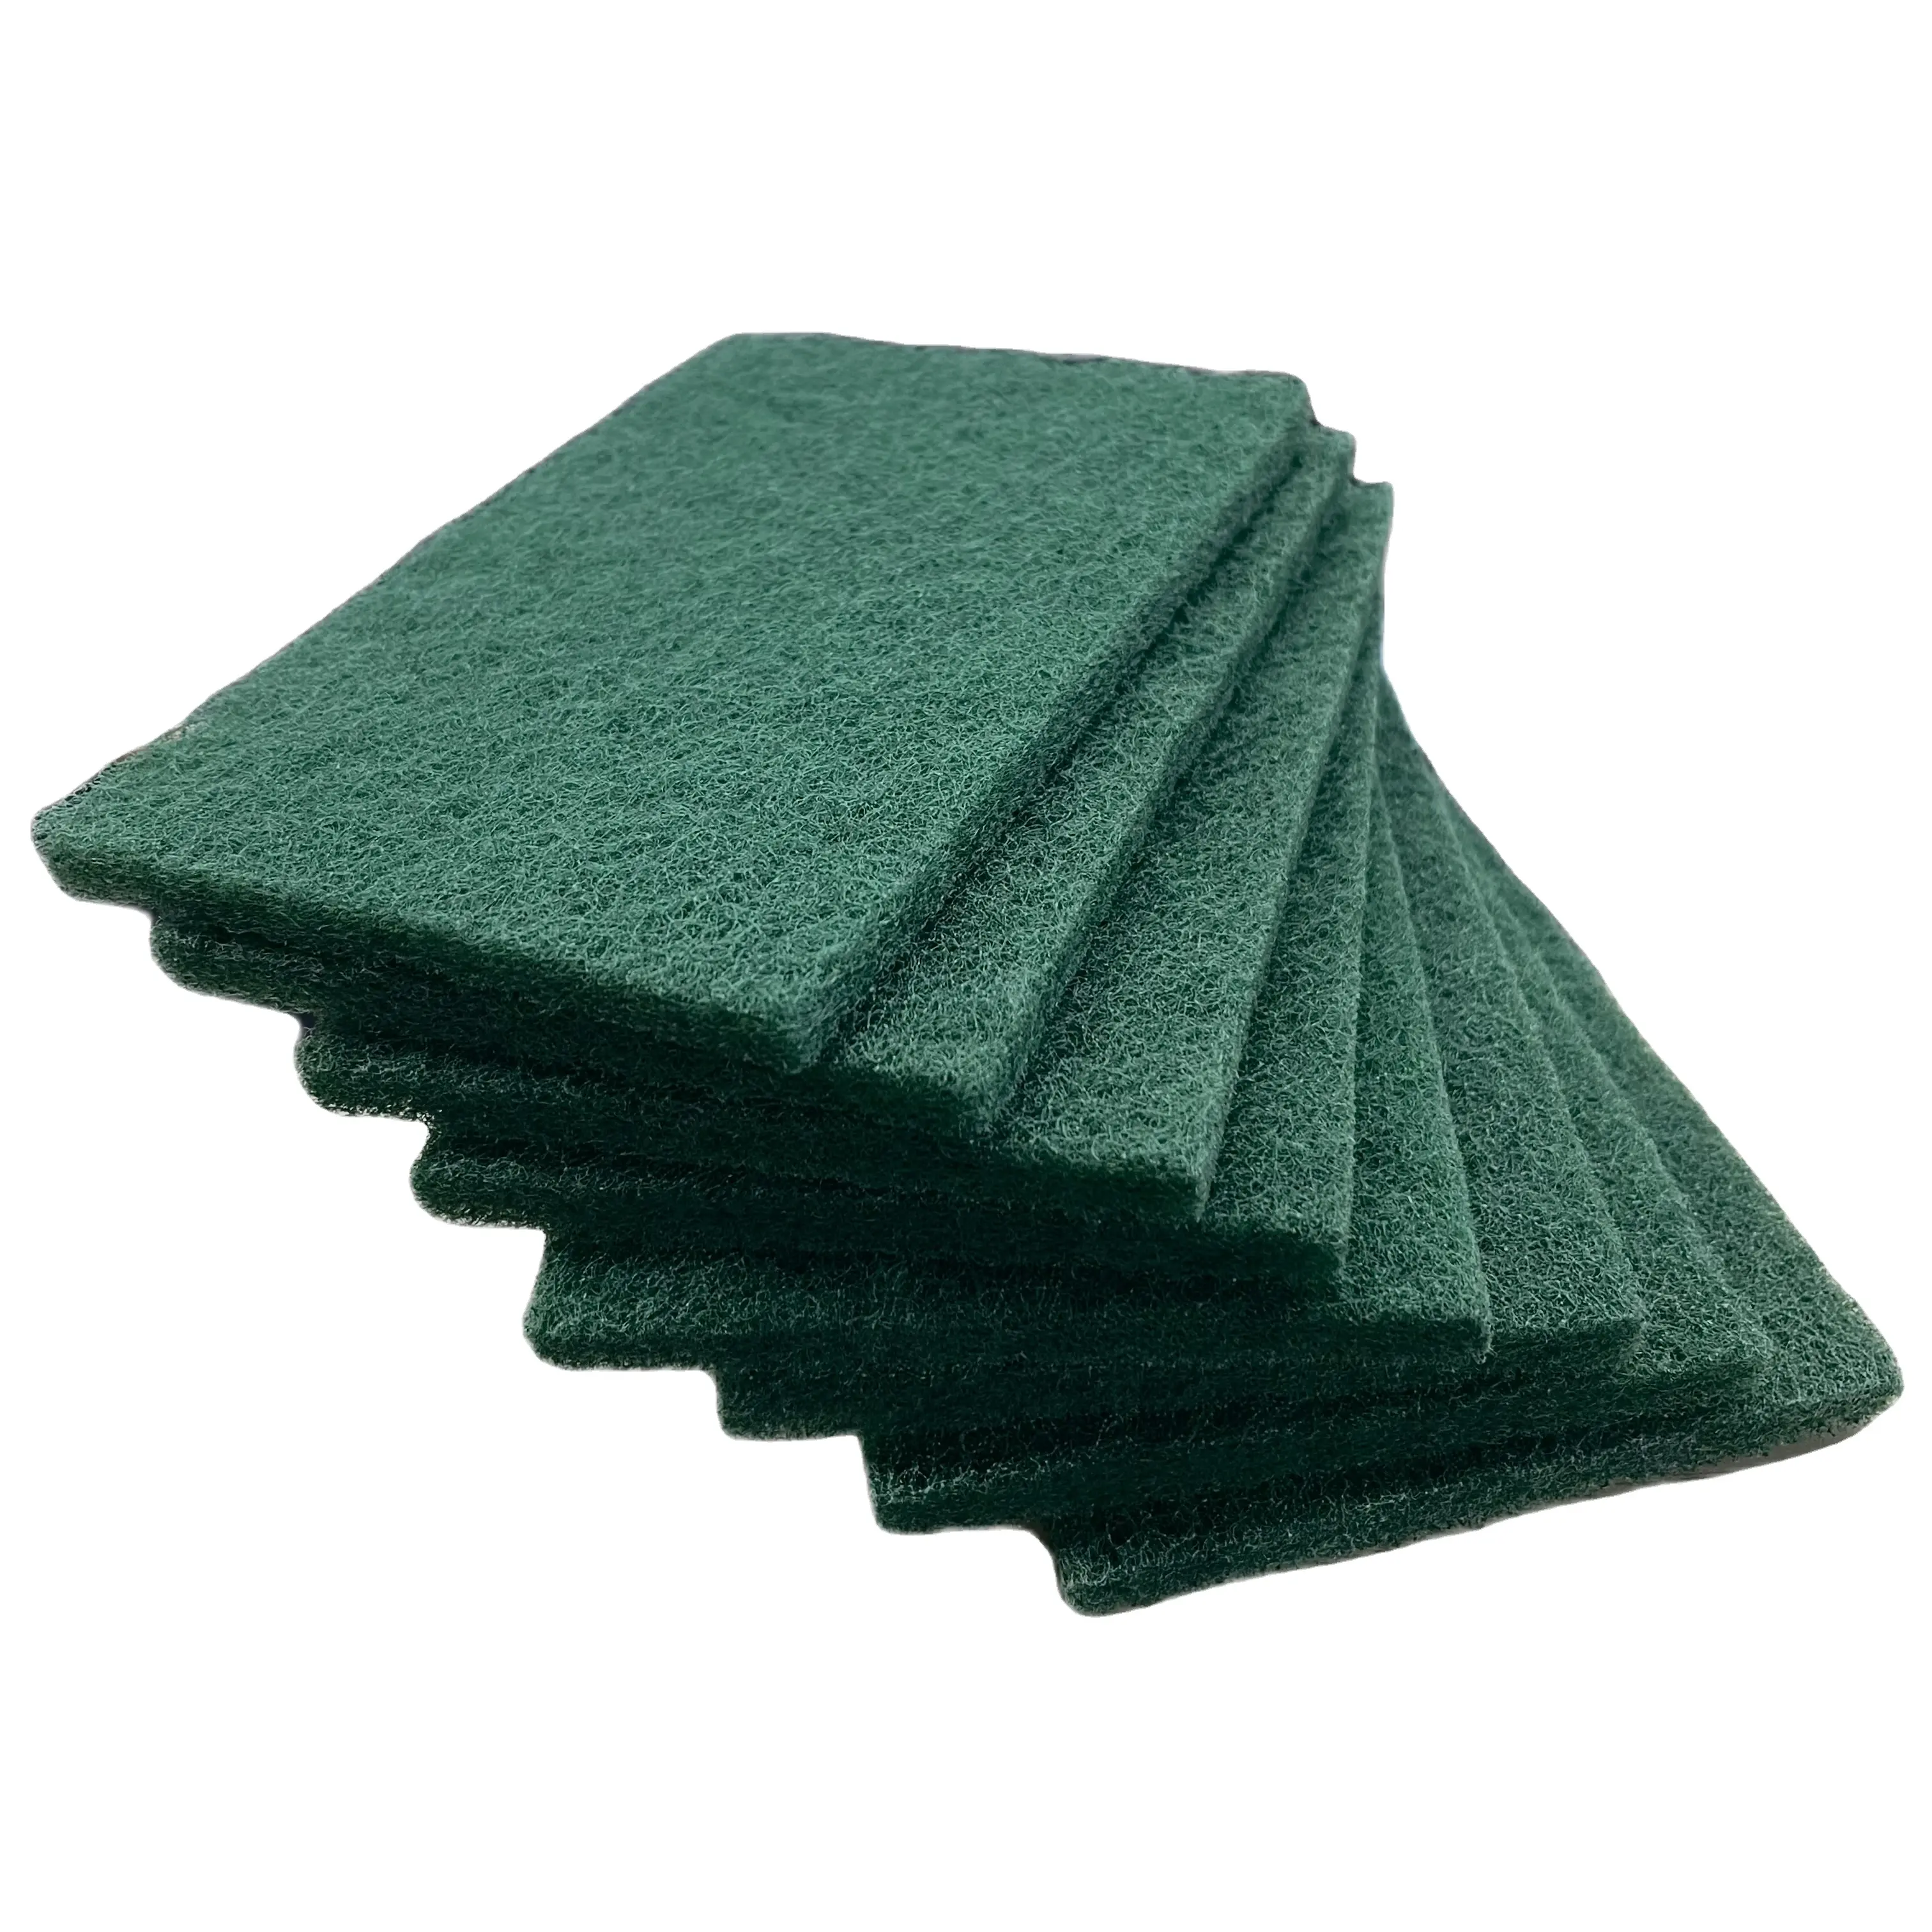 Household Cleaning Scouring Pads Heavy Duty Scrubber Dish Cleaning Pads with Non-Scratch Anti-Grease Technology